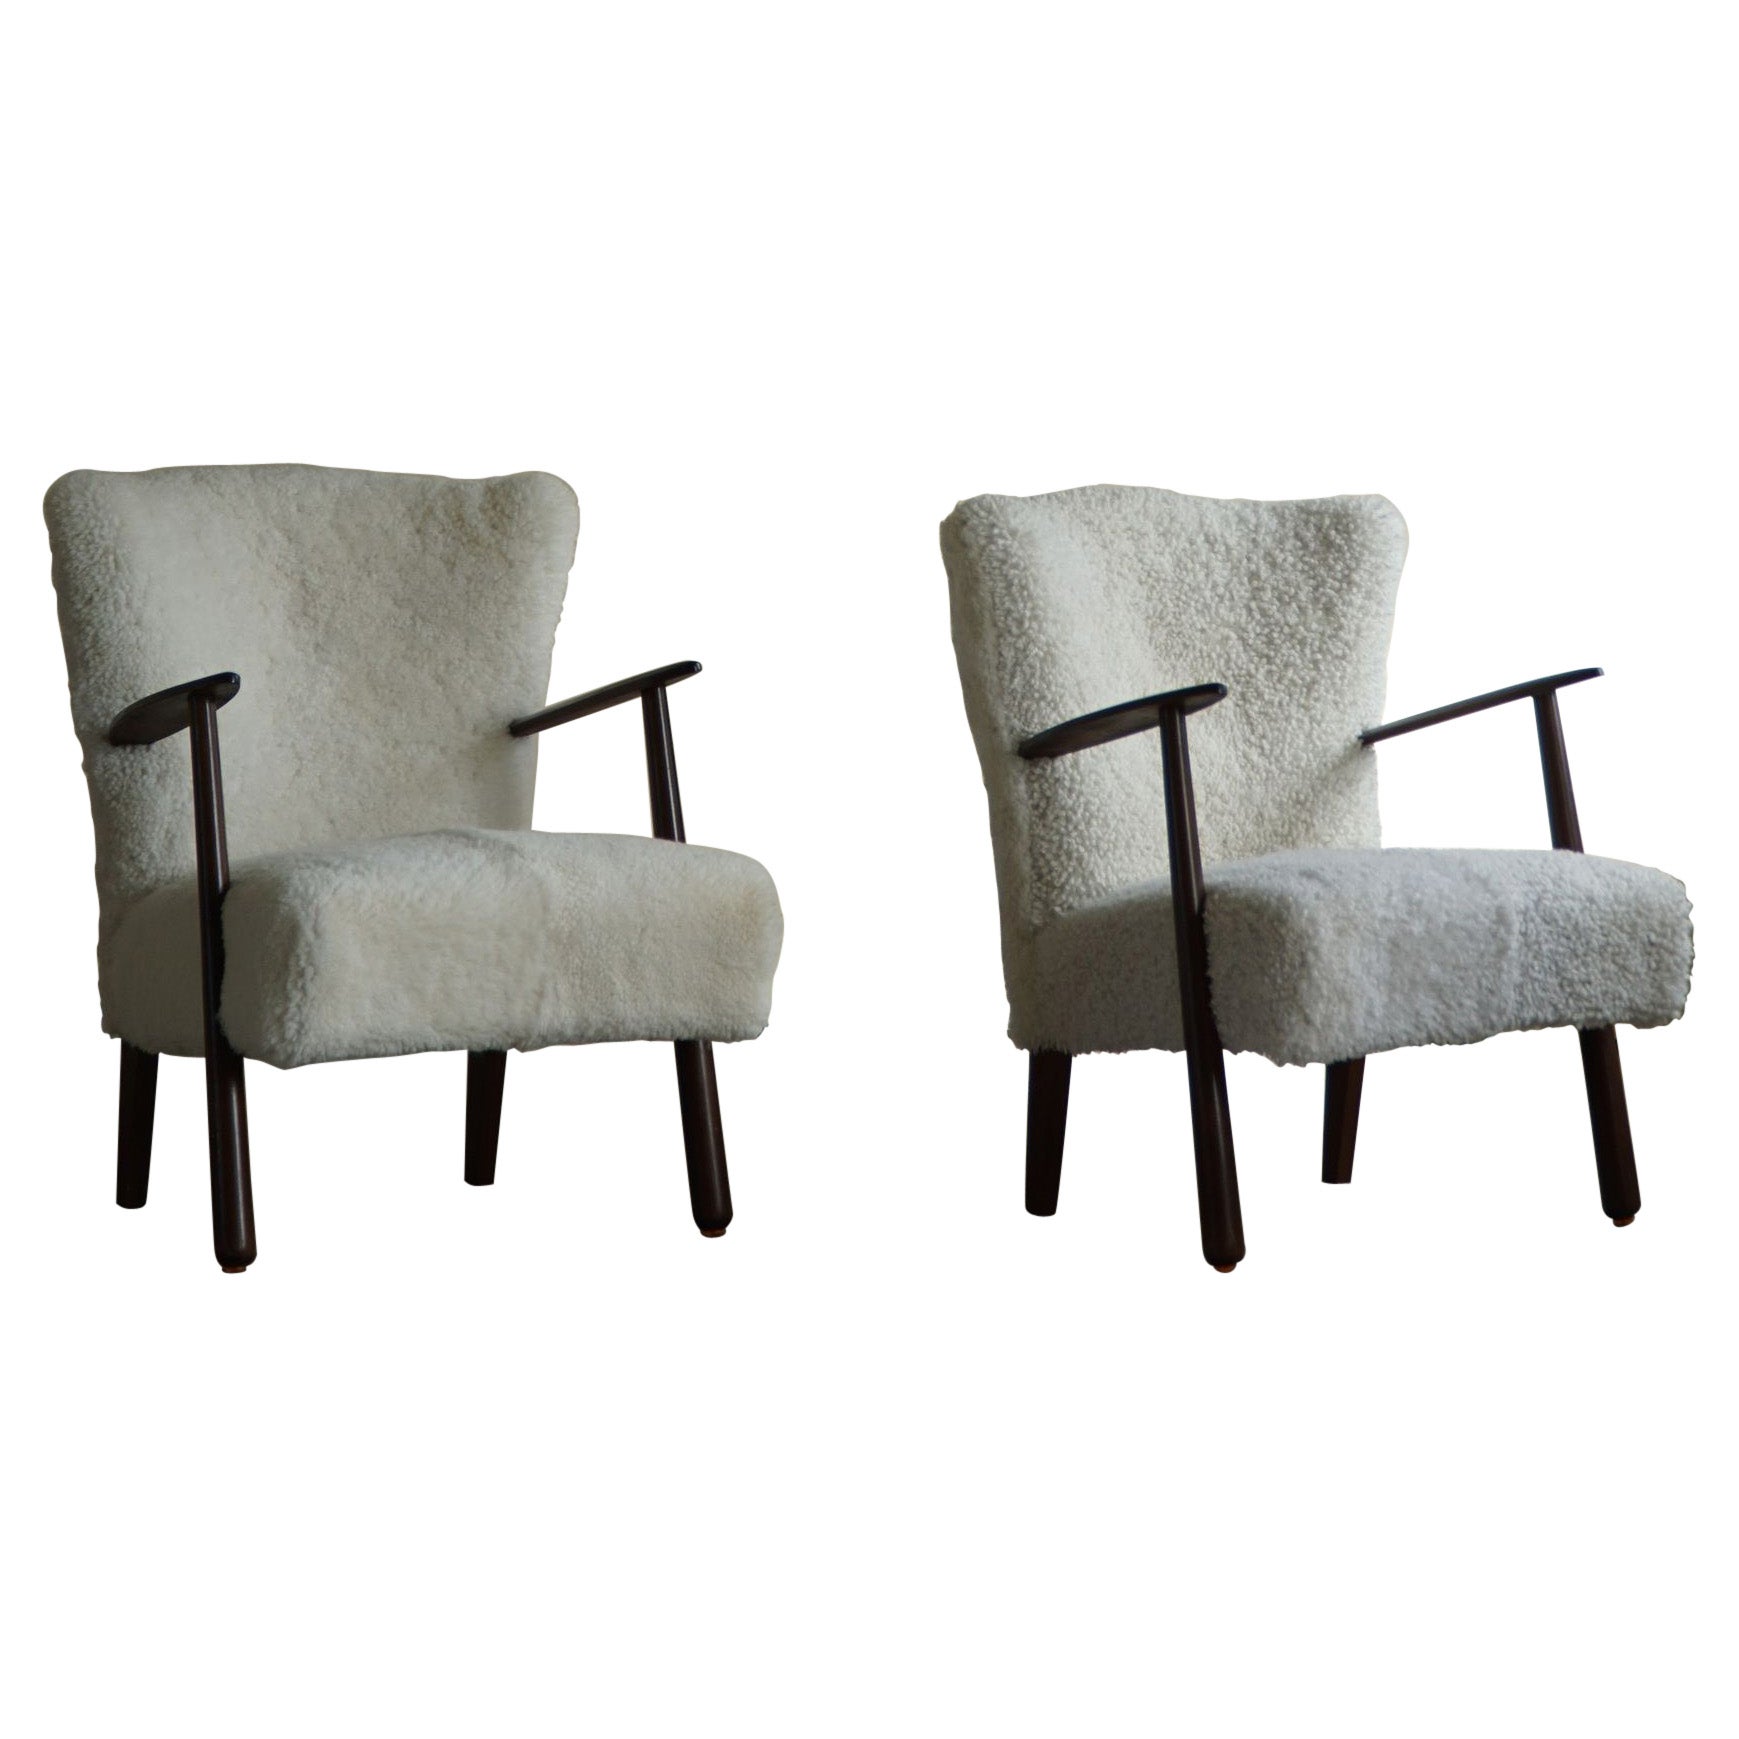 Danish Mid-Century, Pair of Lounge Chairs, Reupholstered in Lambswool, 1960s